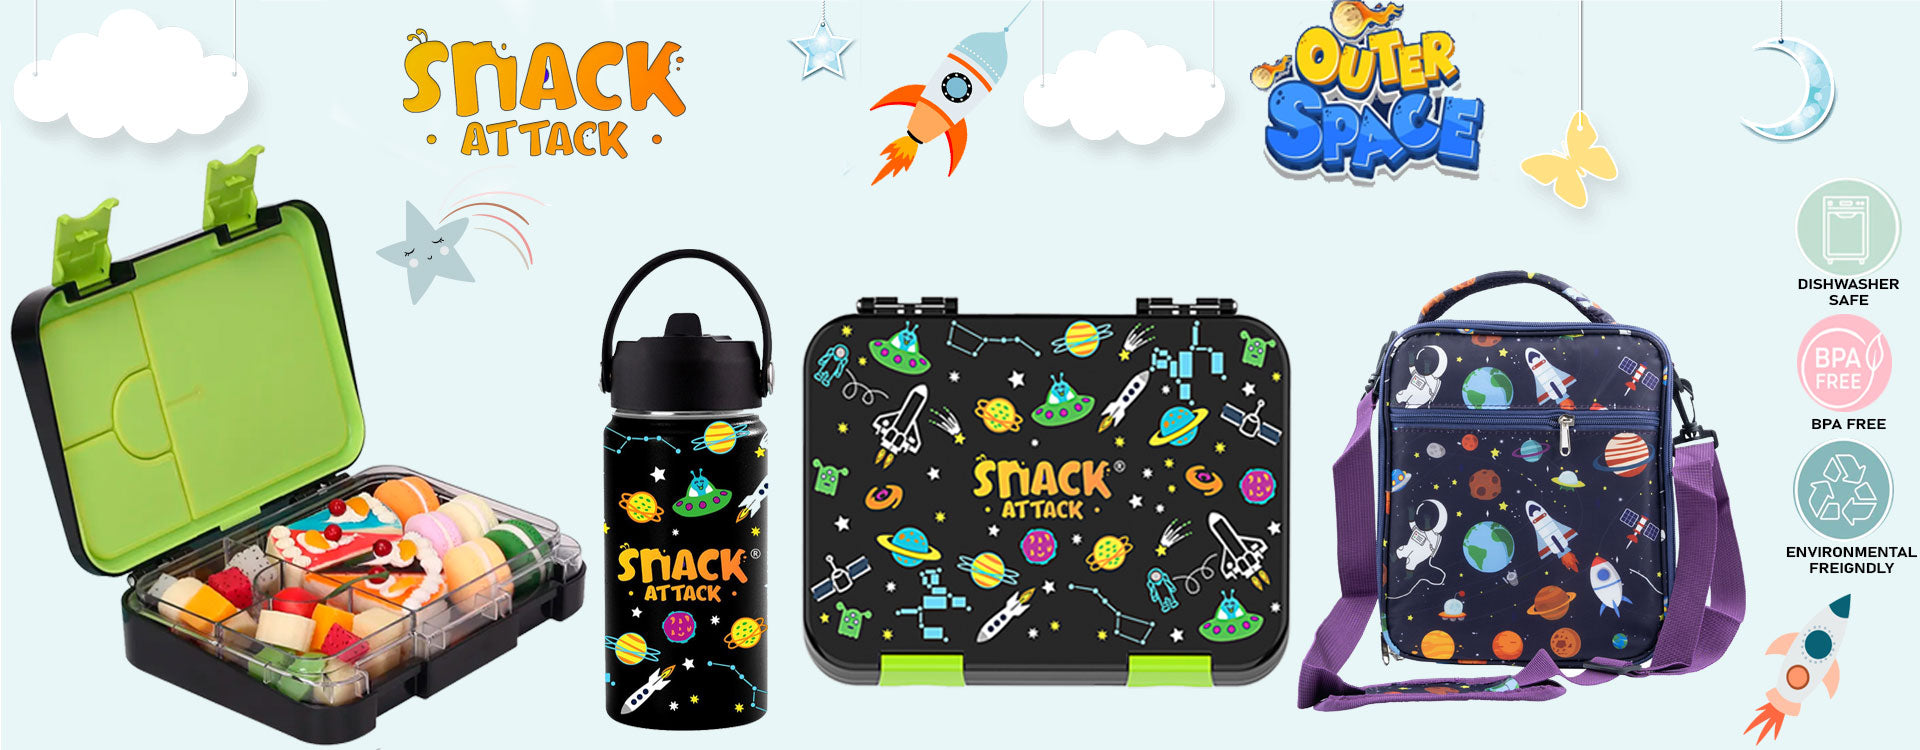 Lunch Bags Kids by Snack Attack Insulated Lunch Boxes Bag Girls